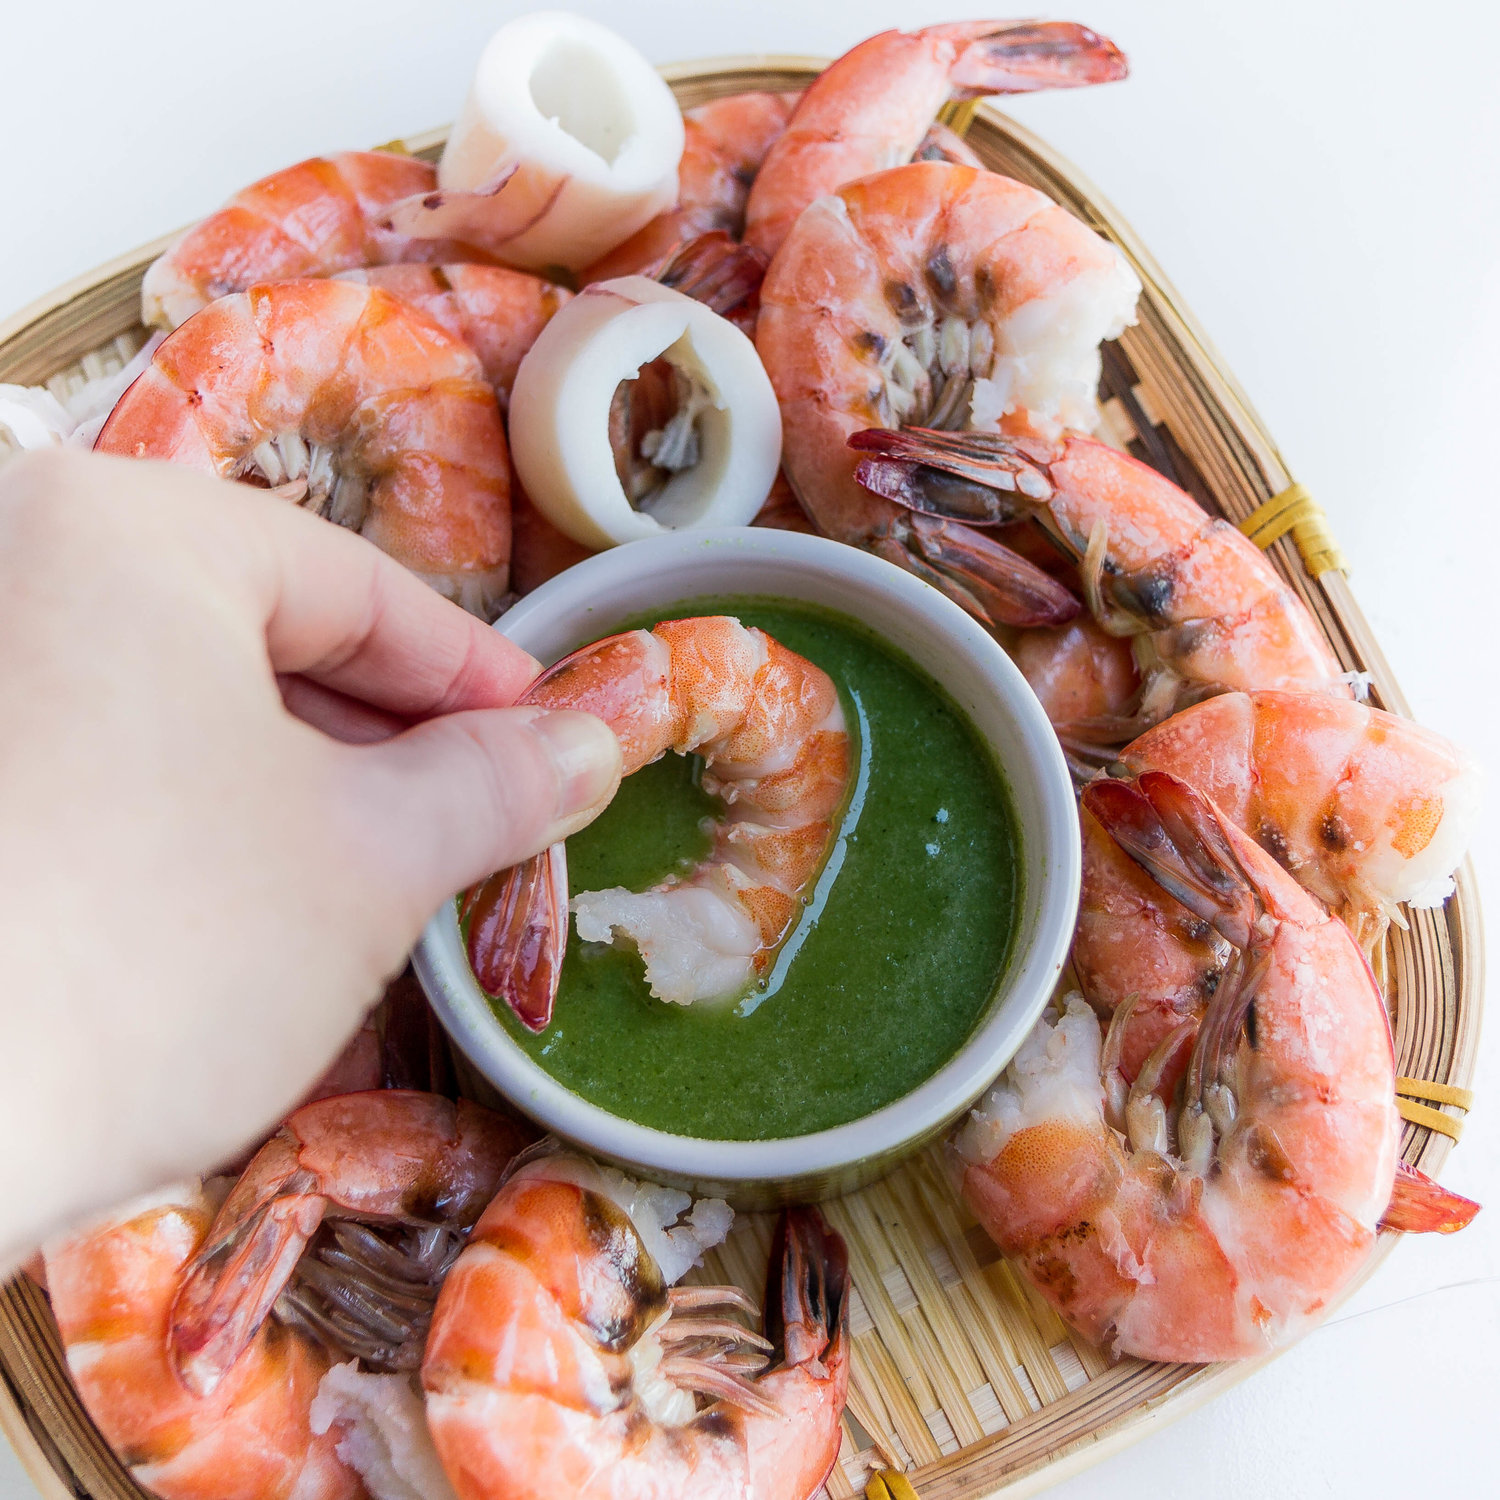 Vietnamese Green Seafood Sauce with Sweetened Condensed Milk (Muối Ớt Xanh)